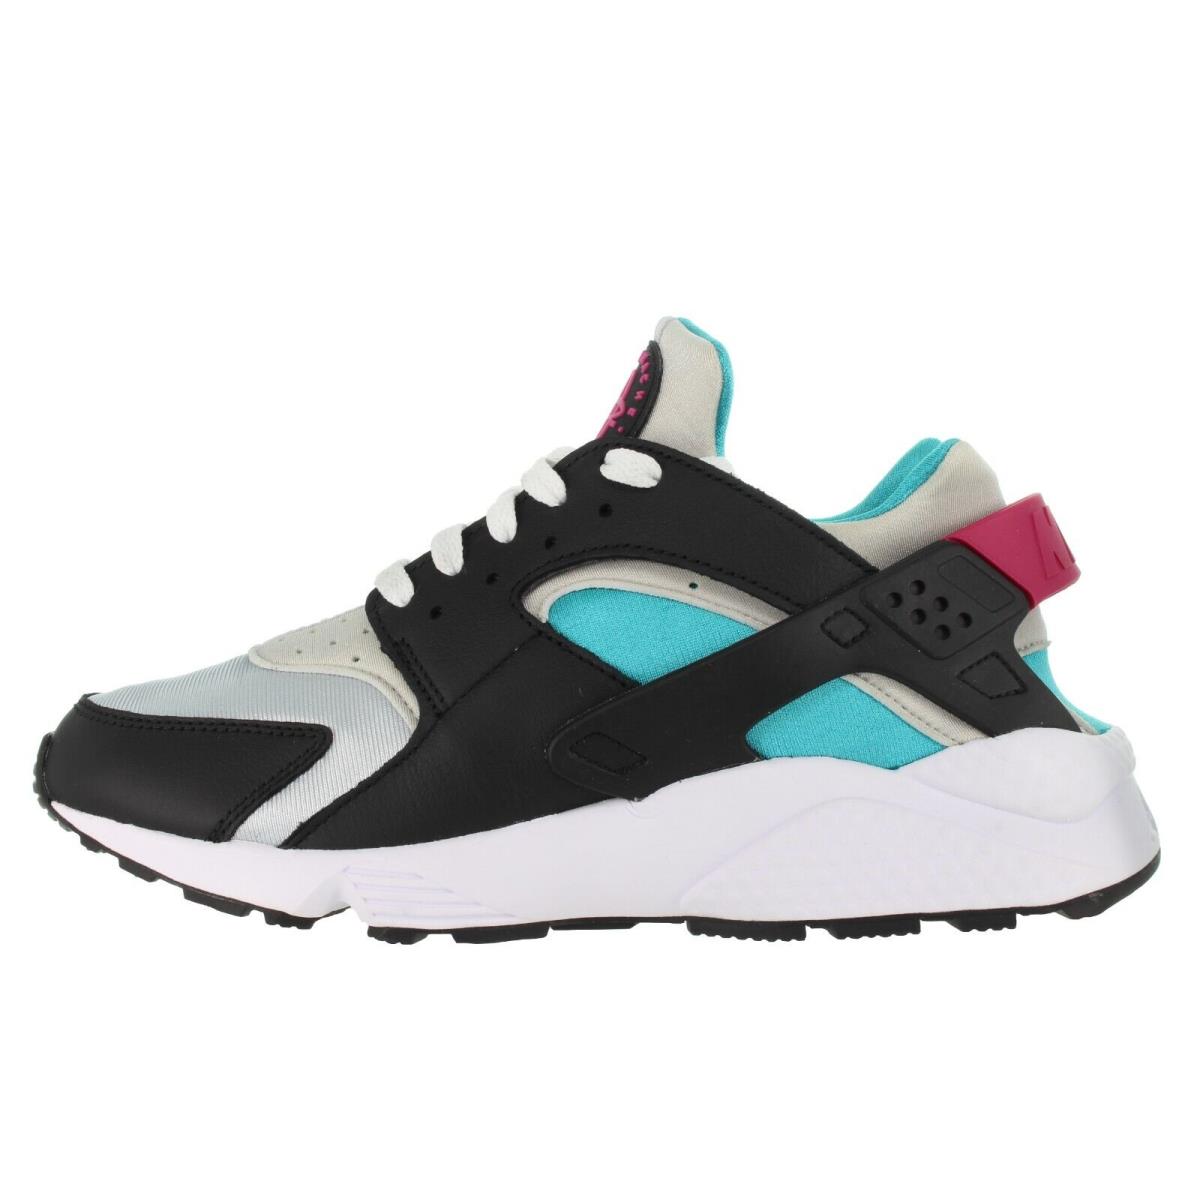 Nike Men`s Air Huarache Multicolor Running Shoes Multiple Size - Black, Pure Platinum, Lethal Pink, New Emerald